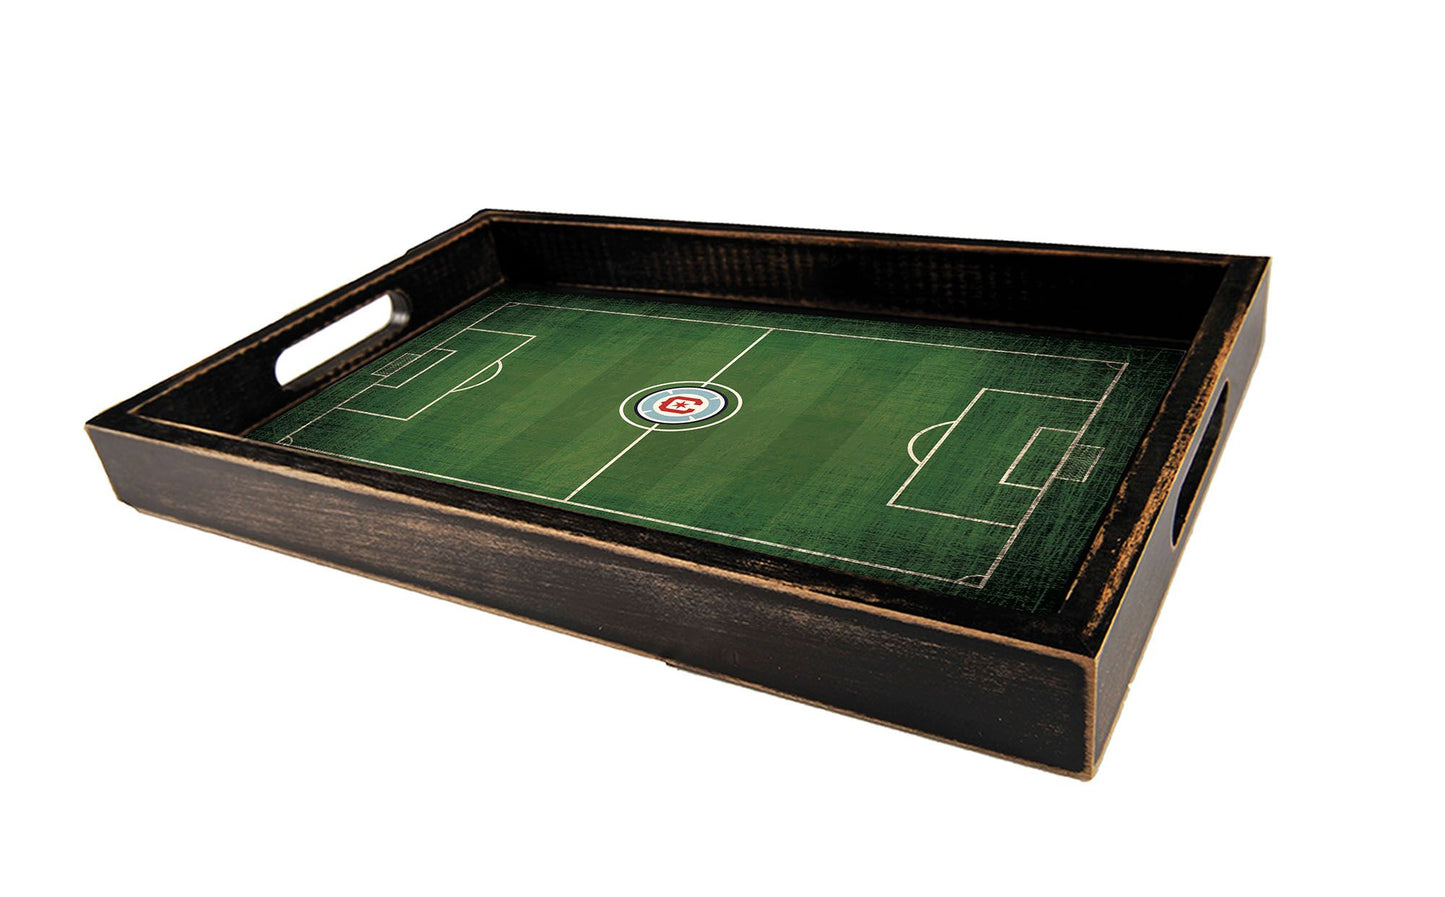 Chicago Fire FC Team Field Serving Tray by Fan Creations